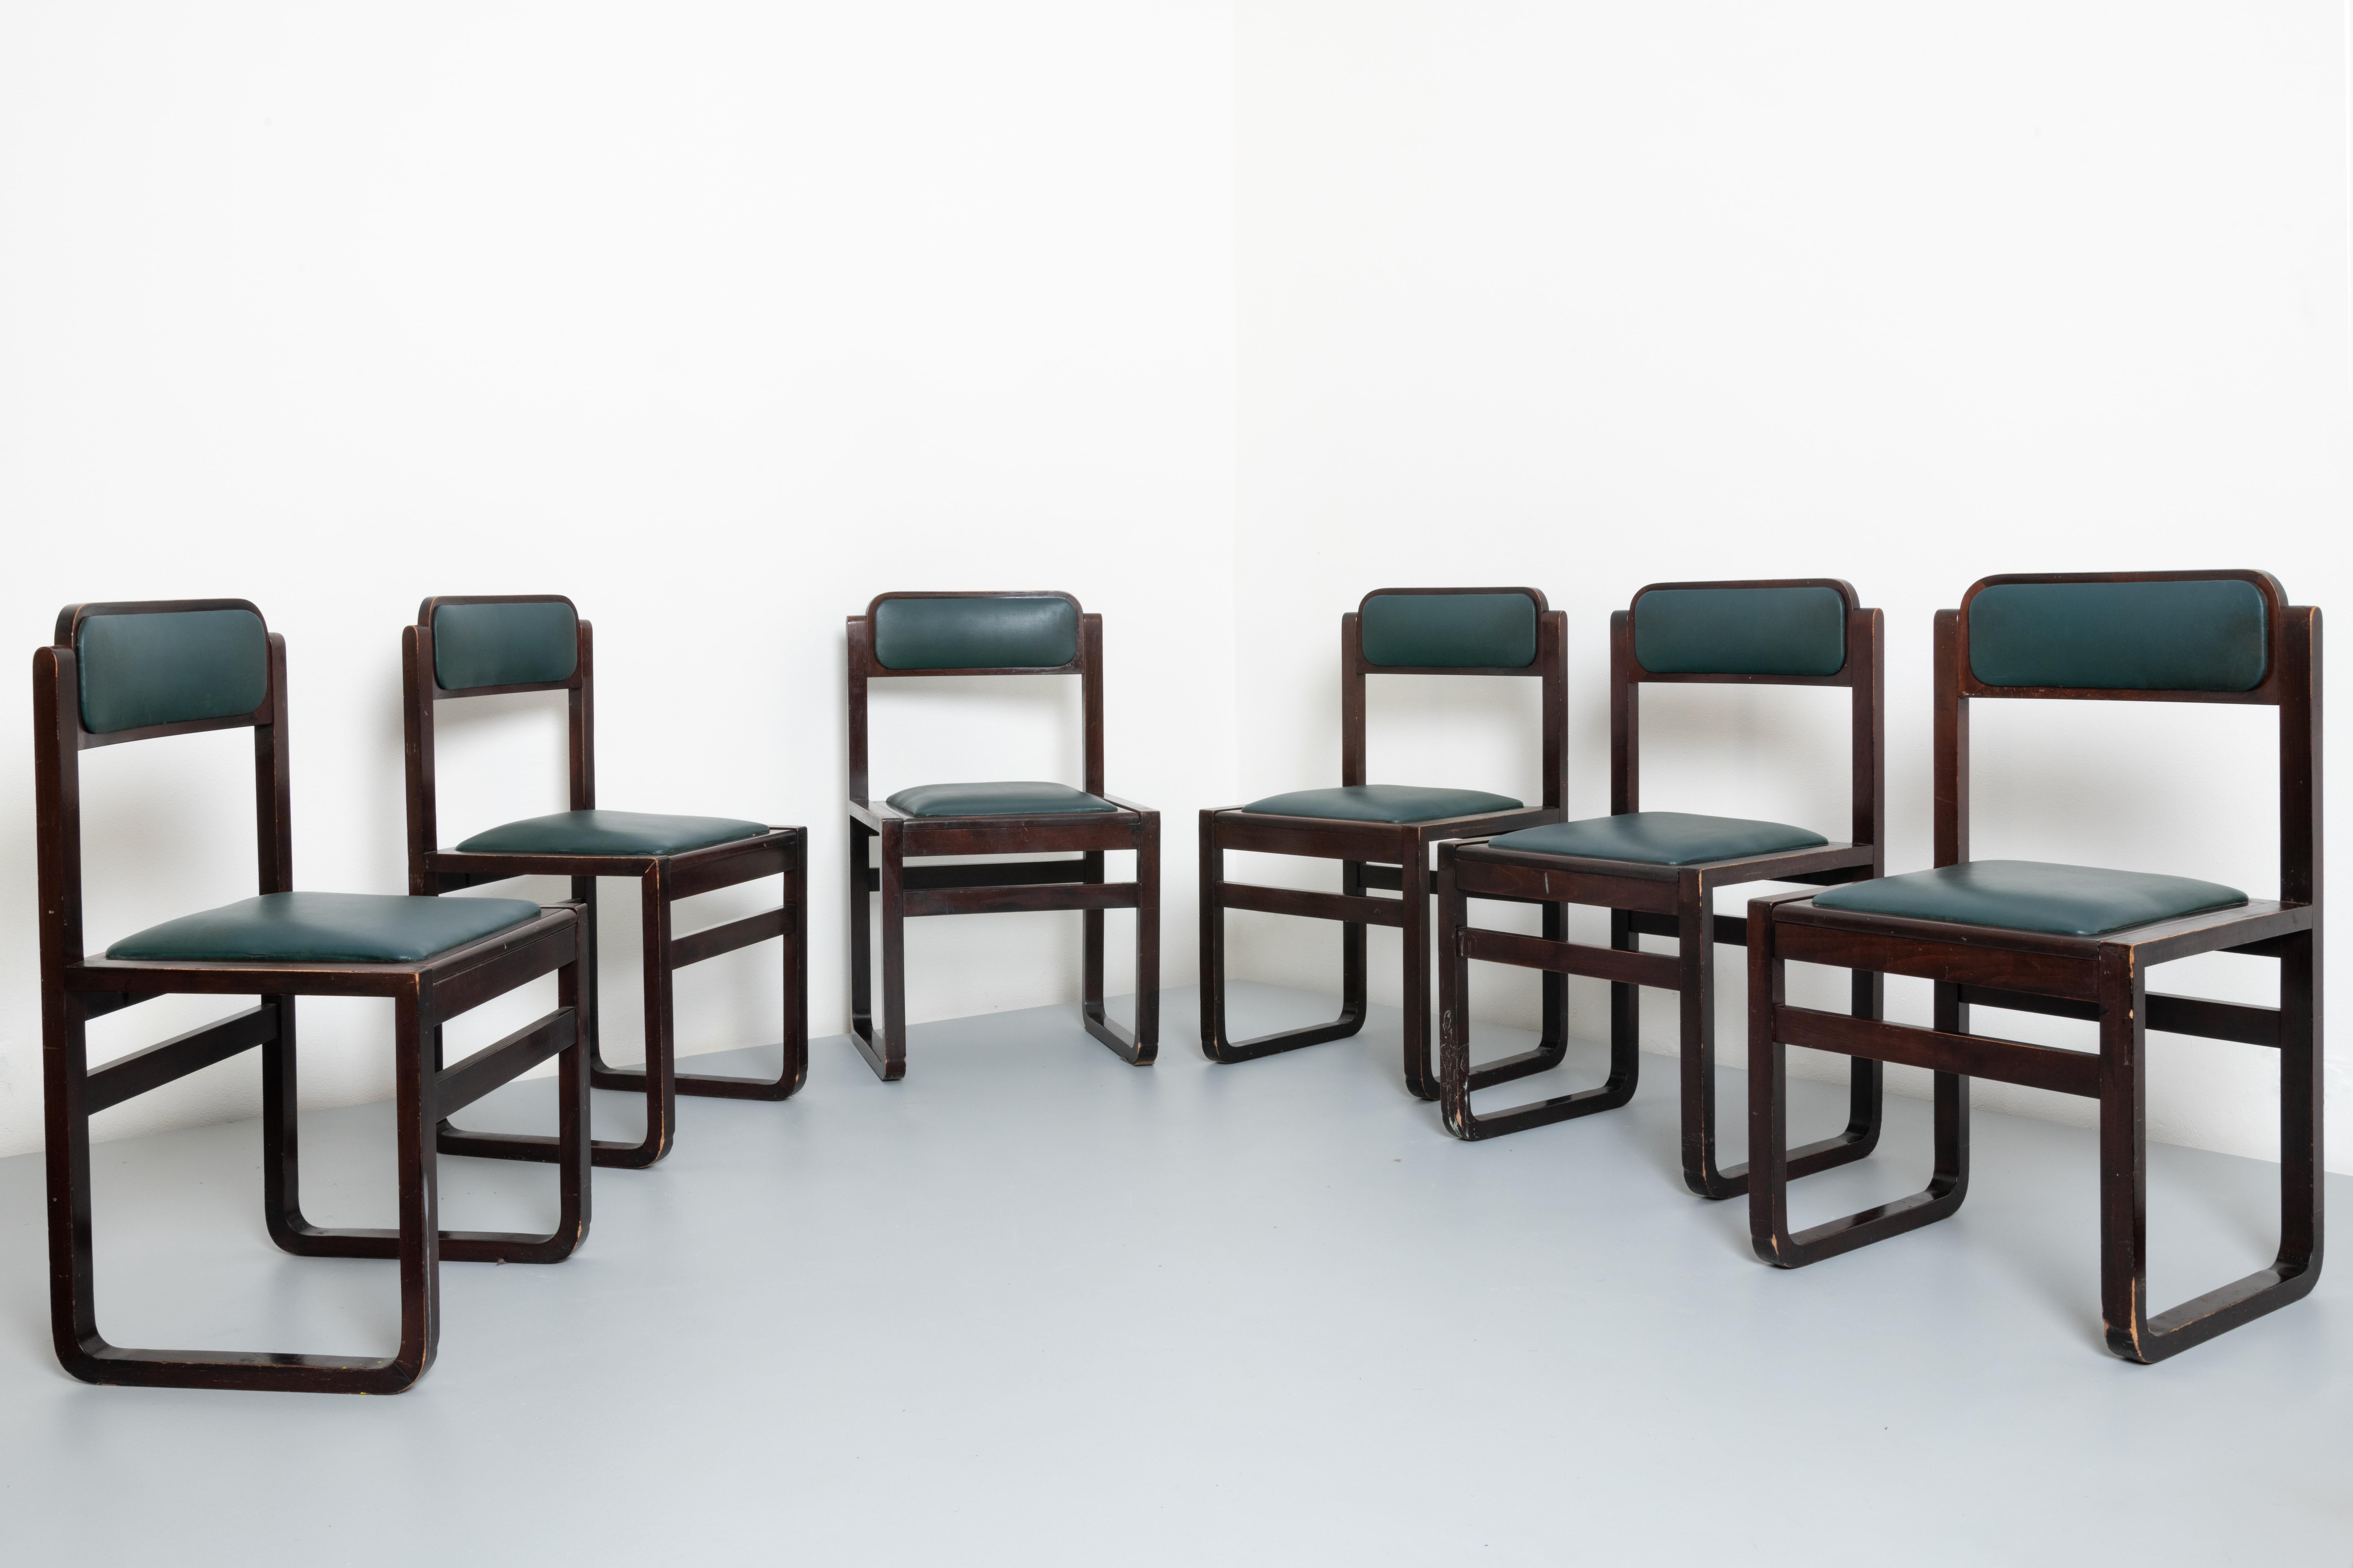 Faux Leather Prod. Italy, C. 1960-1970 Six Chairs in Walnut Wood and Leather Seats For Sale